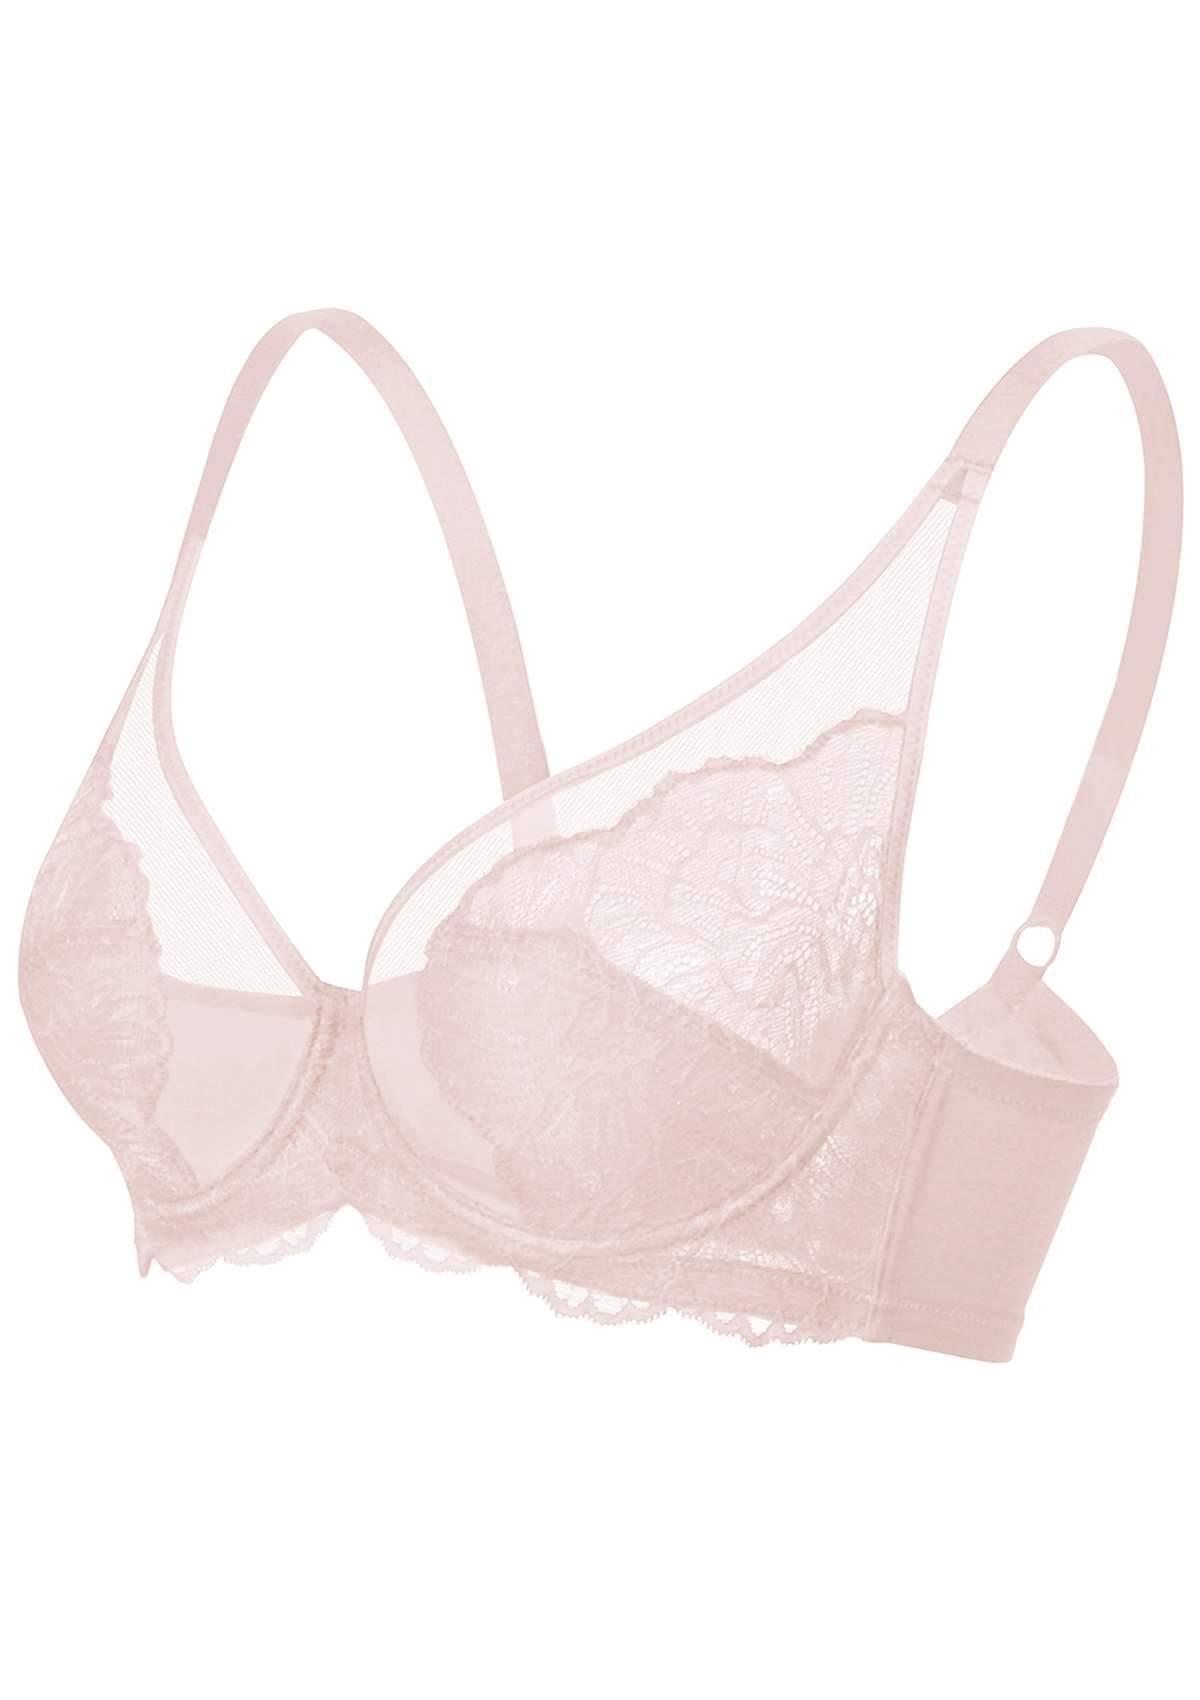 HSIA Blossom Lace Bra And Panties Set: Best Bra For Large Busts - Dark Pink / 46 / DDD/F